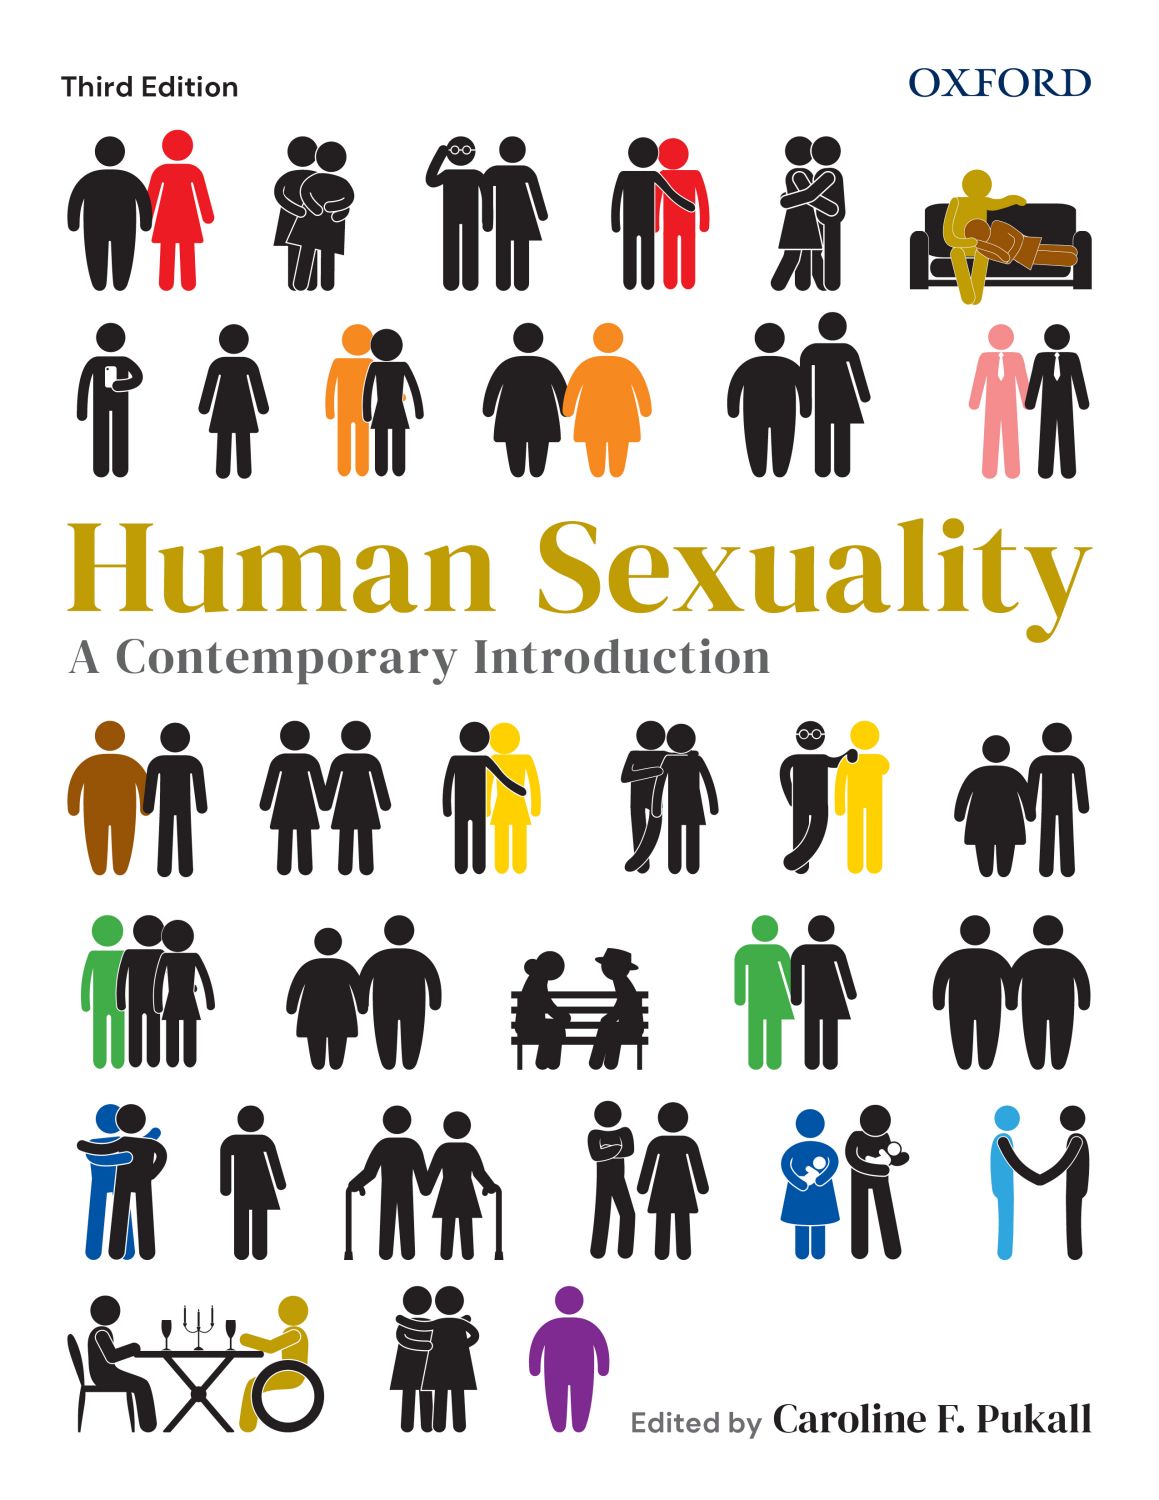 research topics on gender and sexuality